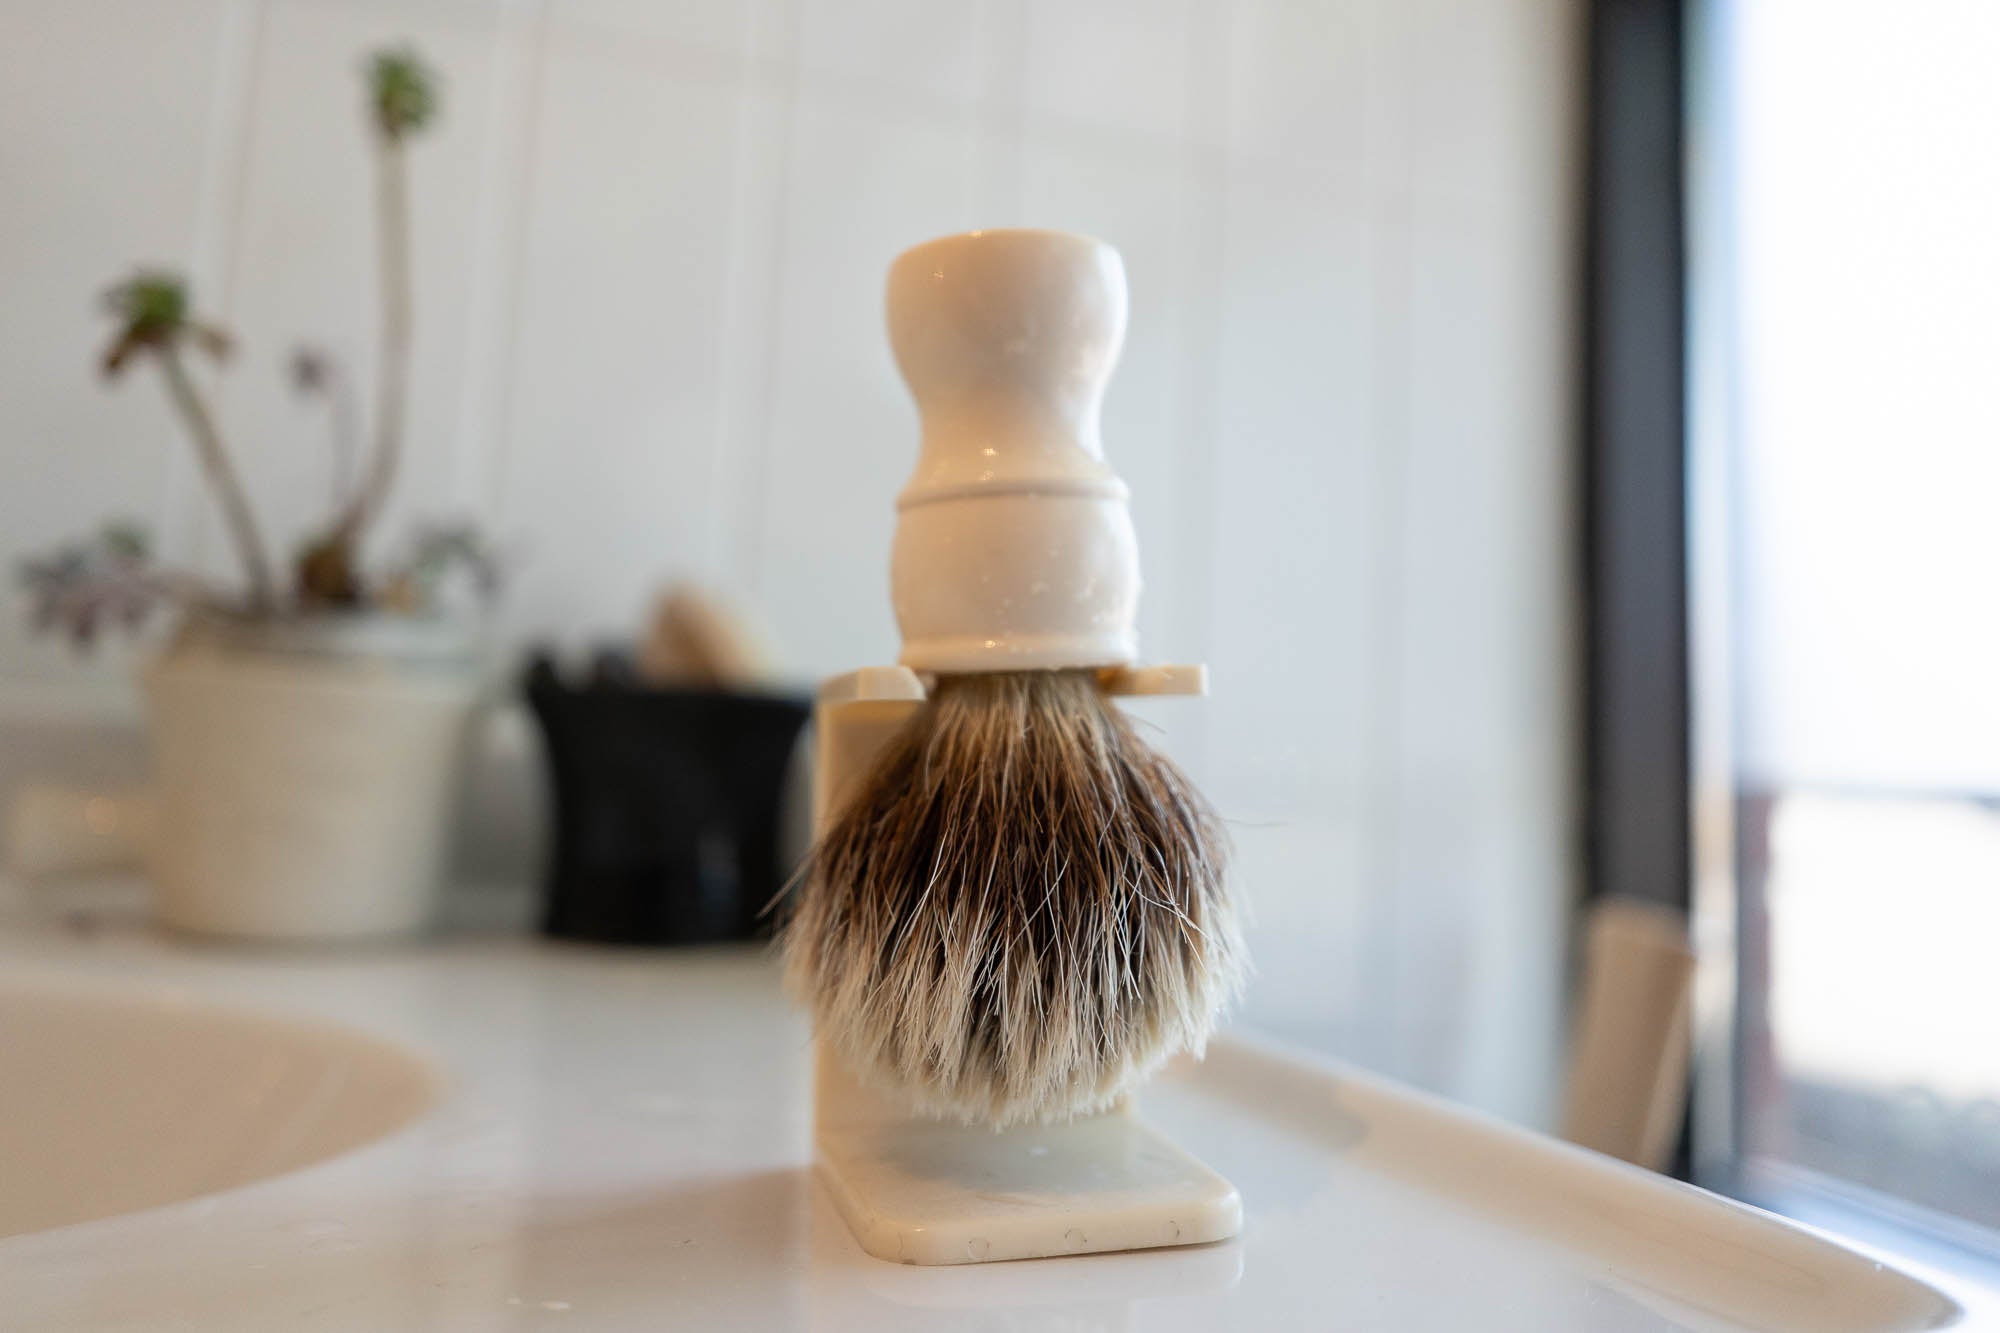 How to Clean and Maintain a Badger Hair Shaving Brush